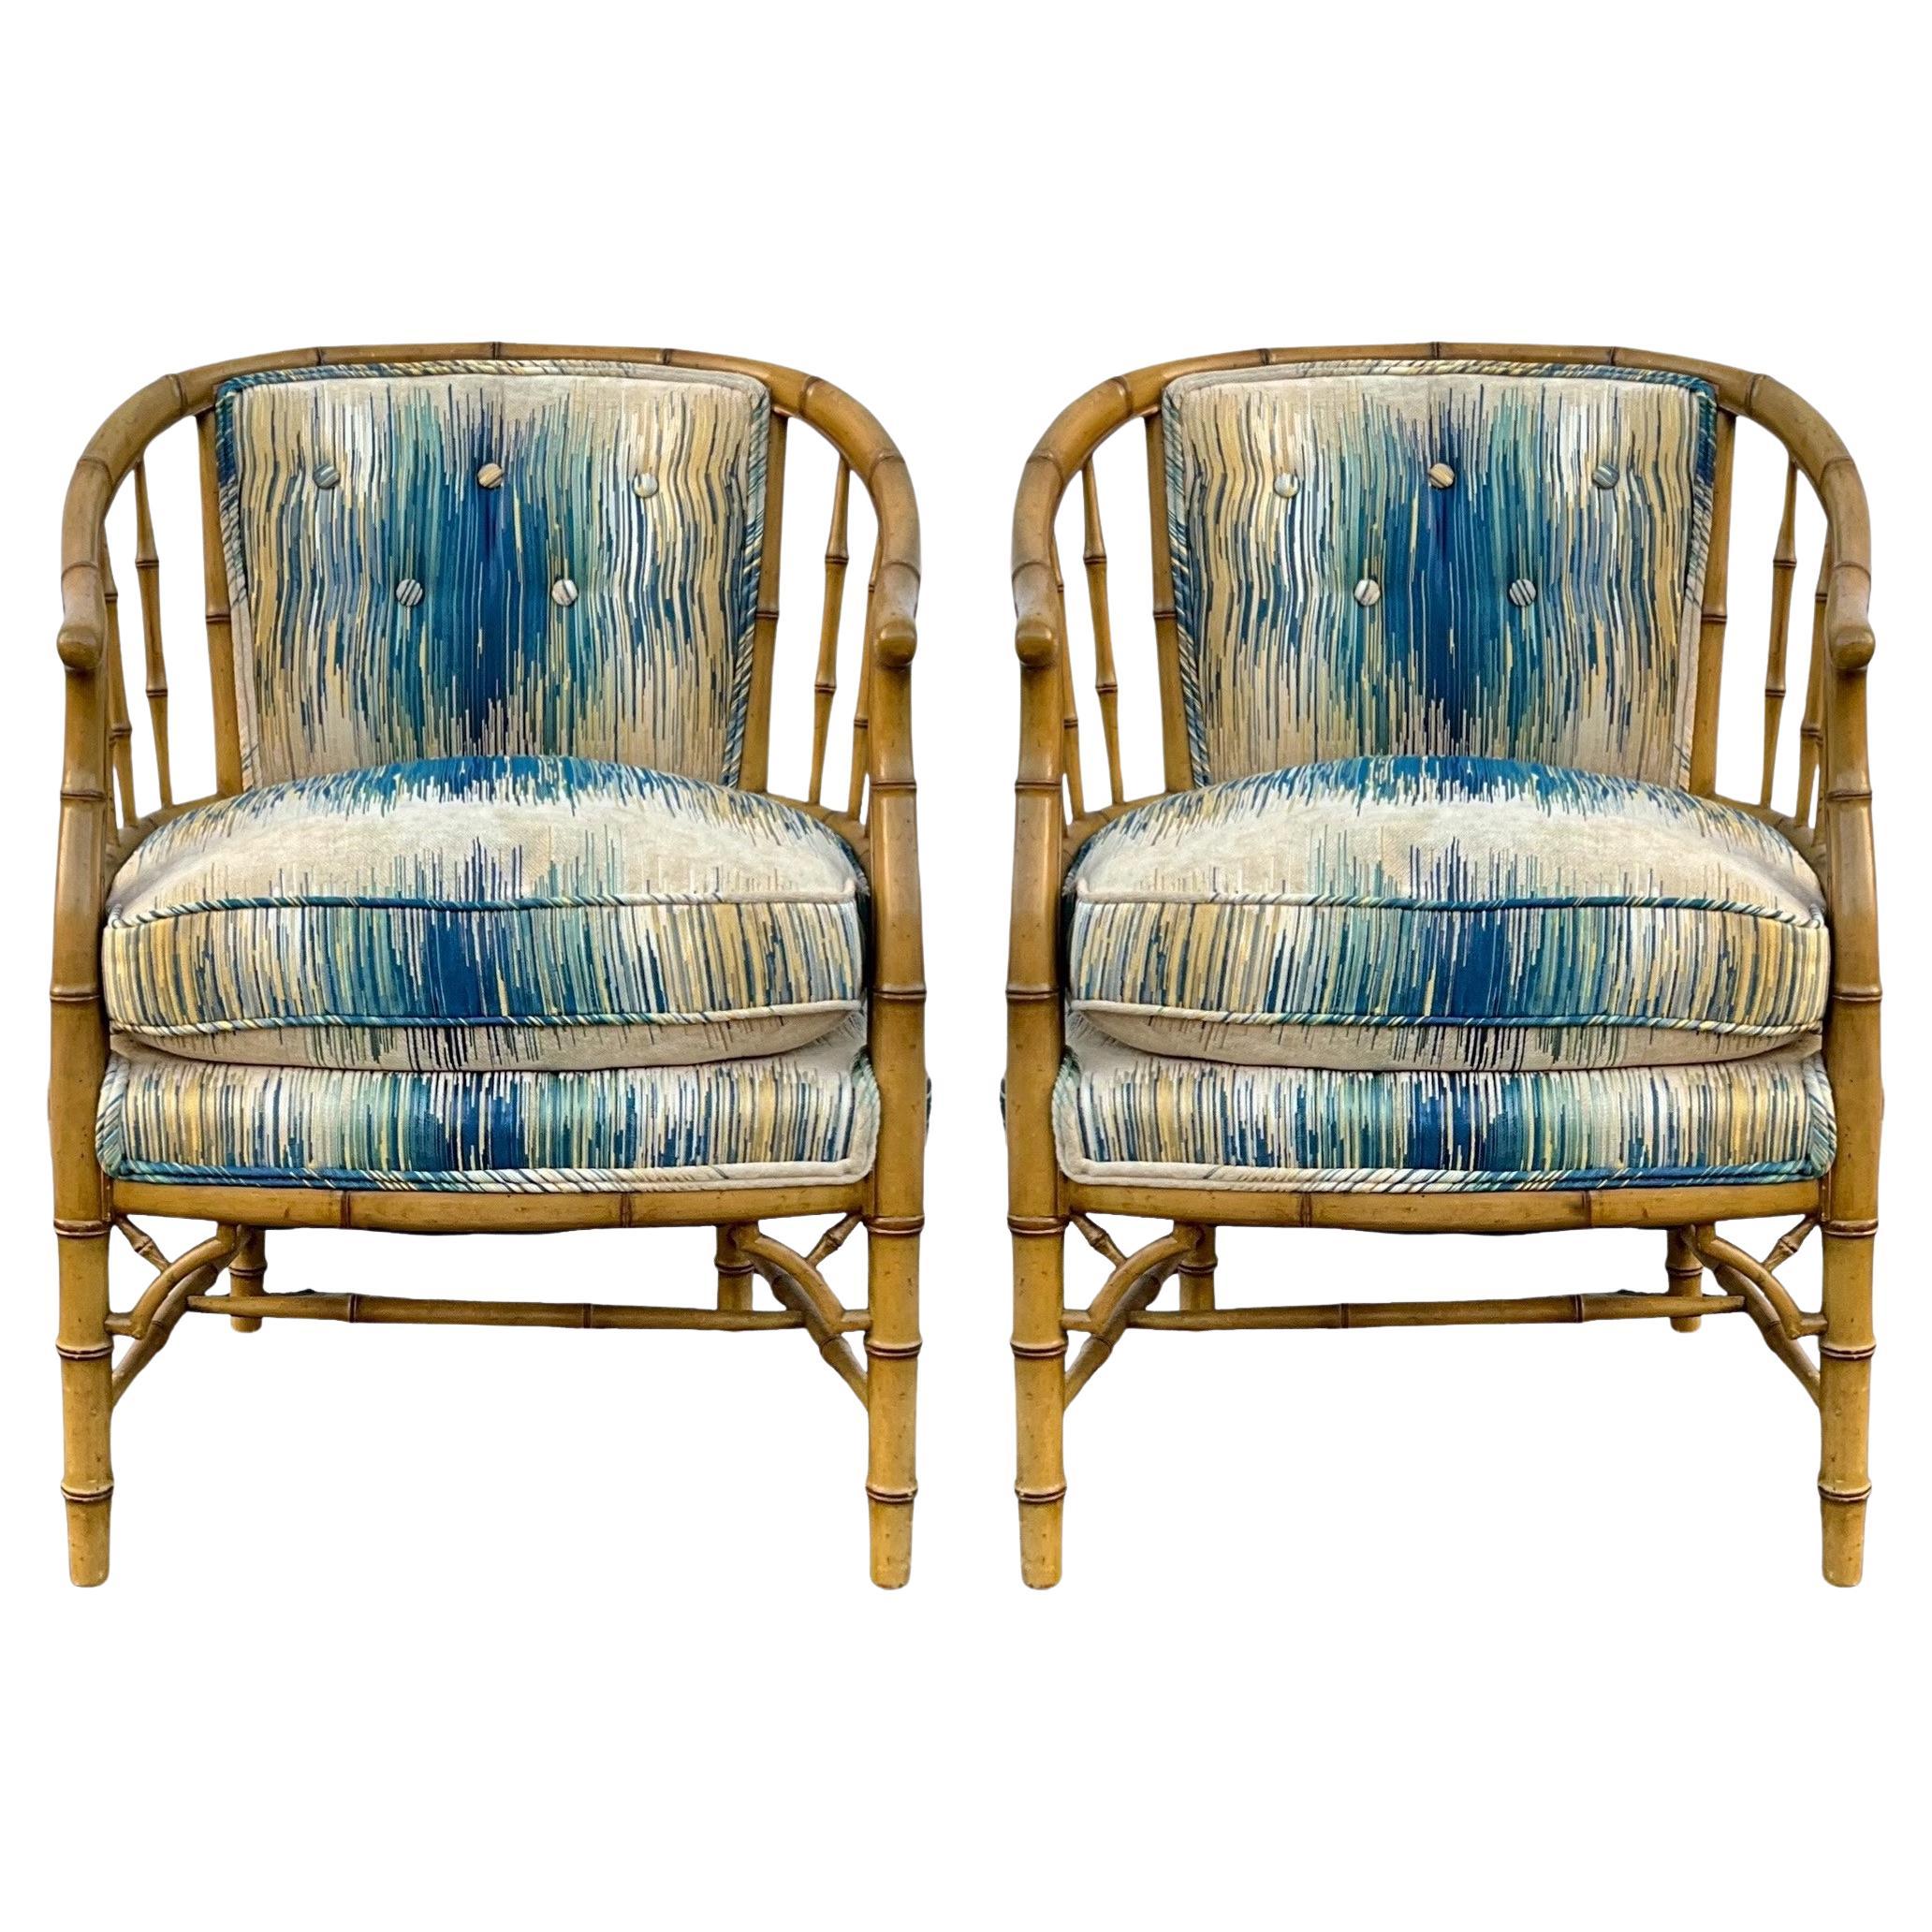 Mid-Century Regency Style Carved & Painted Faux Bamboo Barrel Club Chairs -Pair For Sale